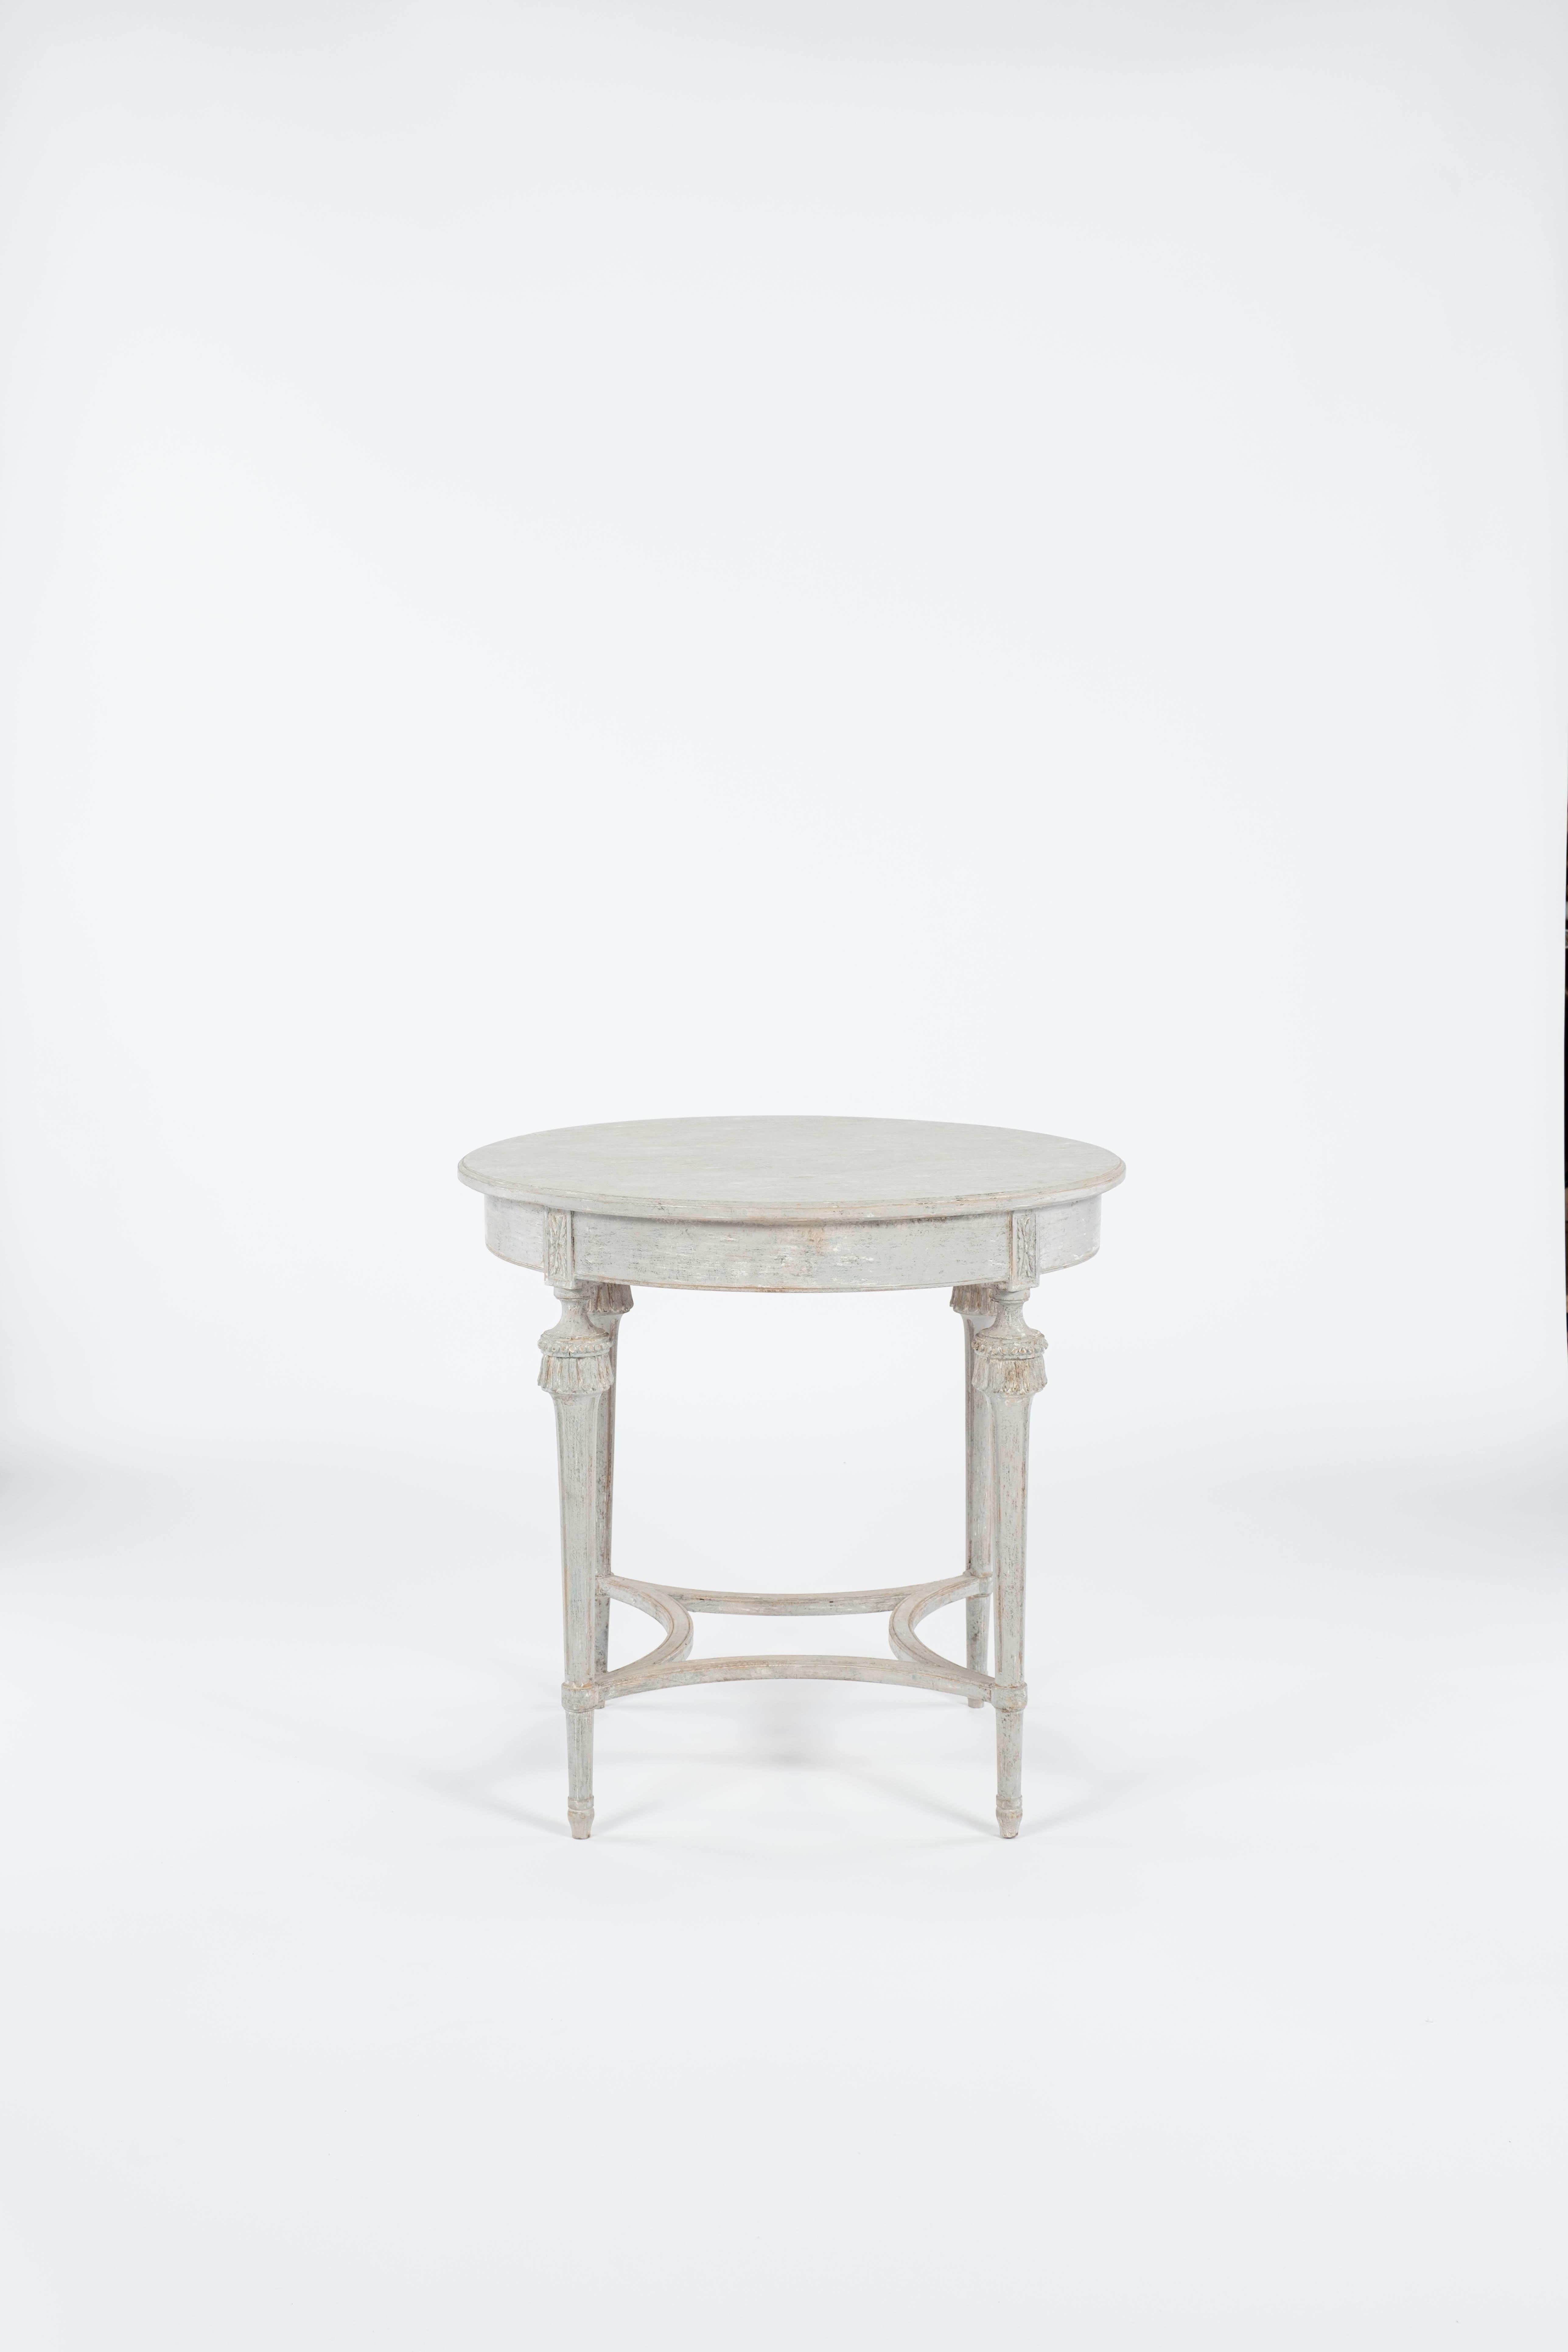 Beautiful Gustavian round table with stretchers.  